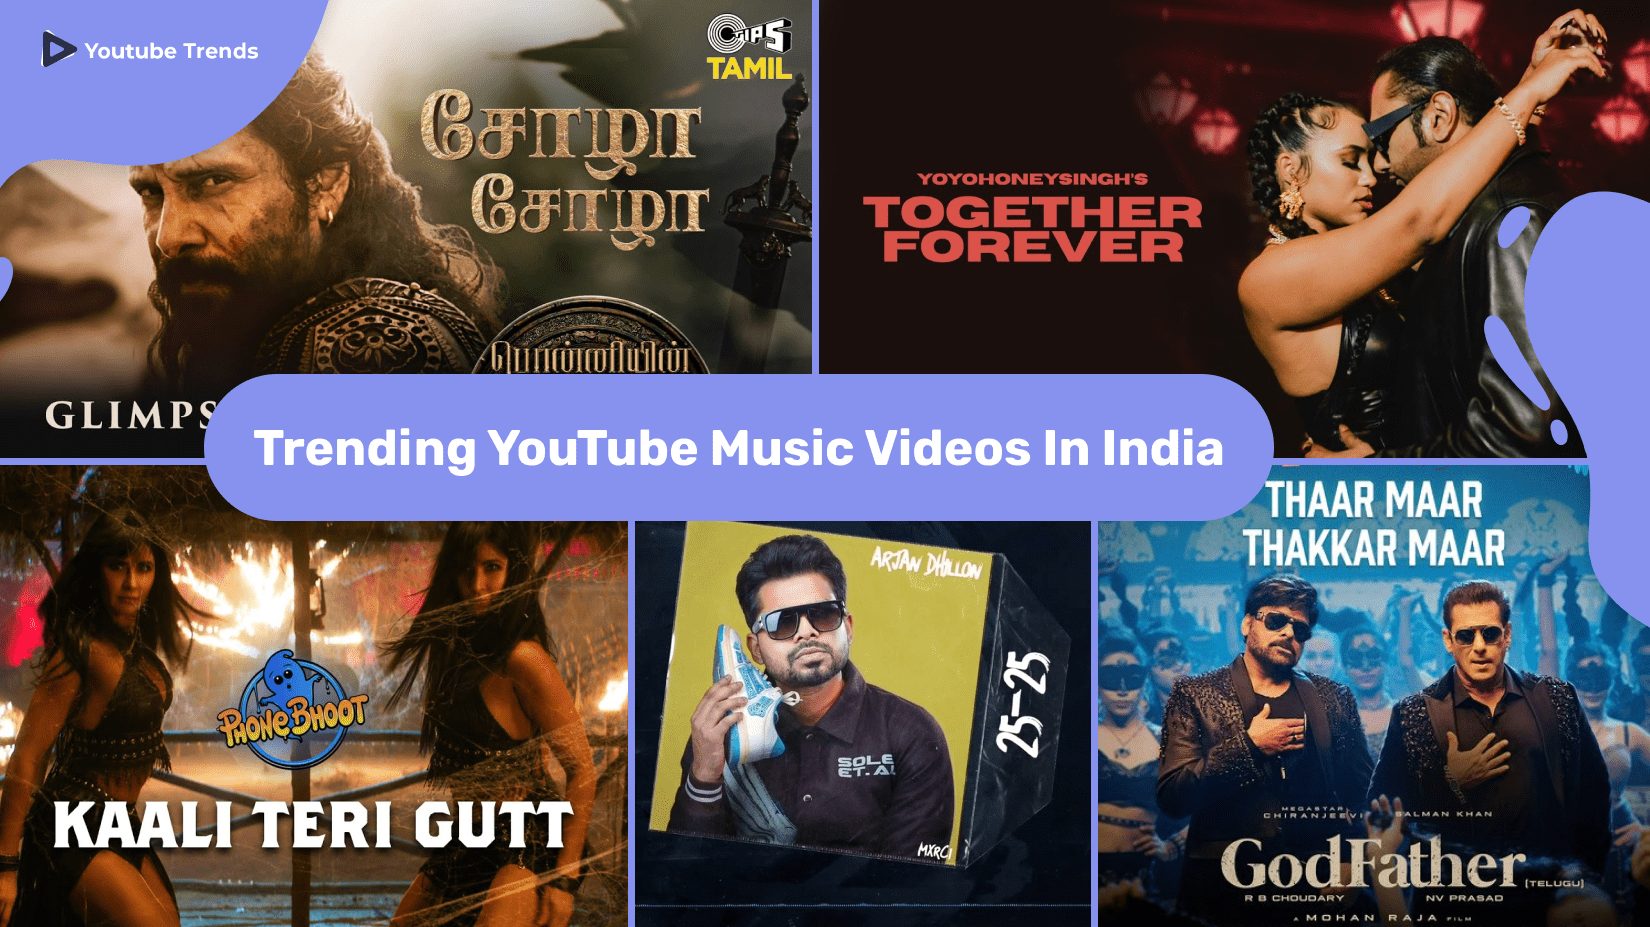 The Best of India’s YouTube Music Videos: A Top 5 List